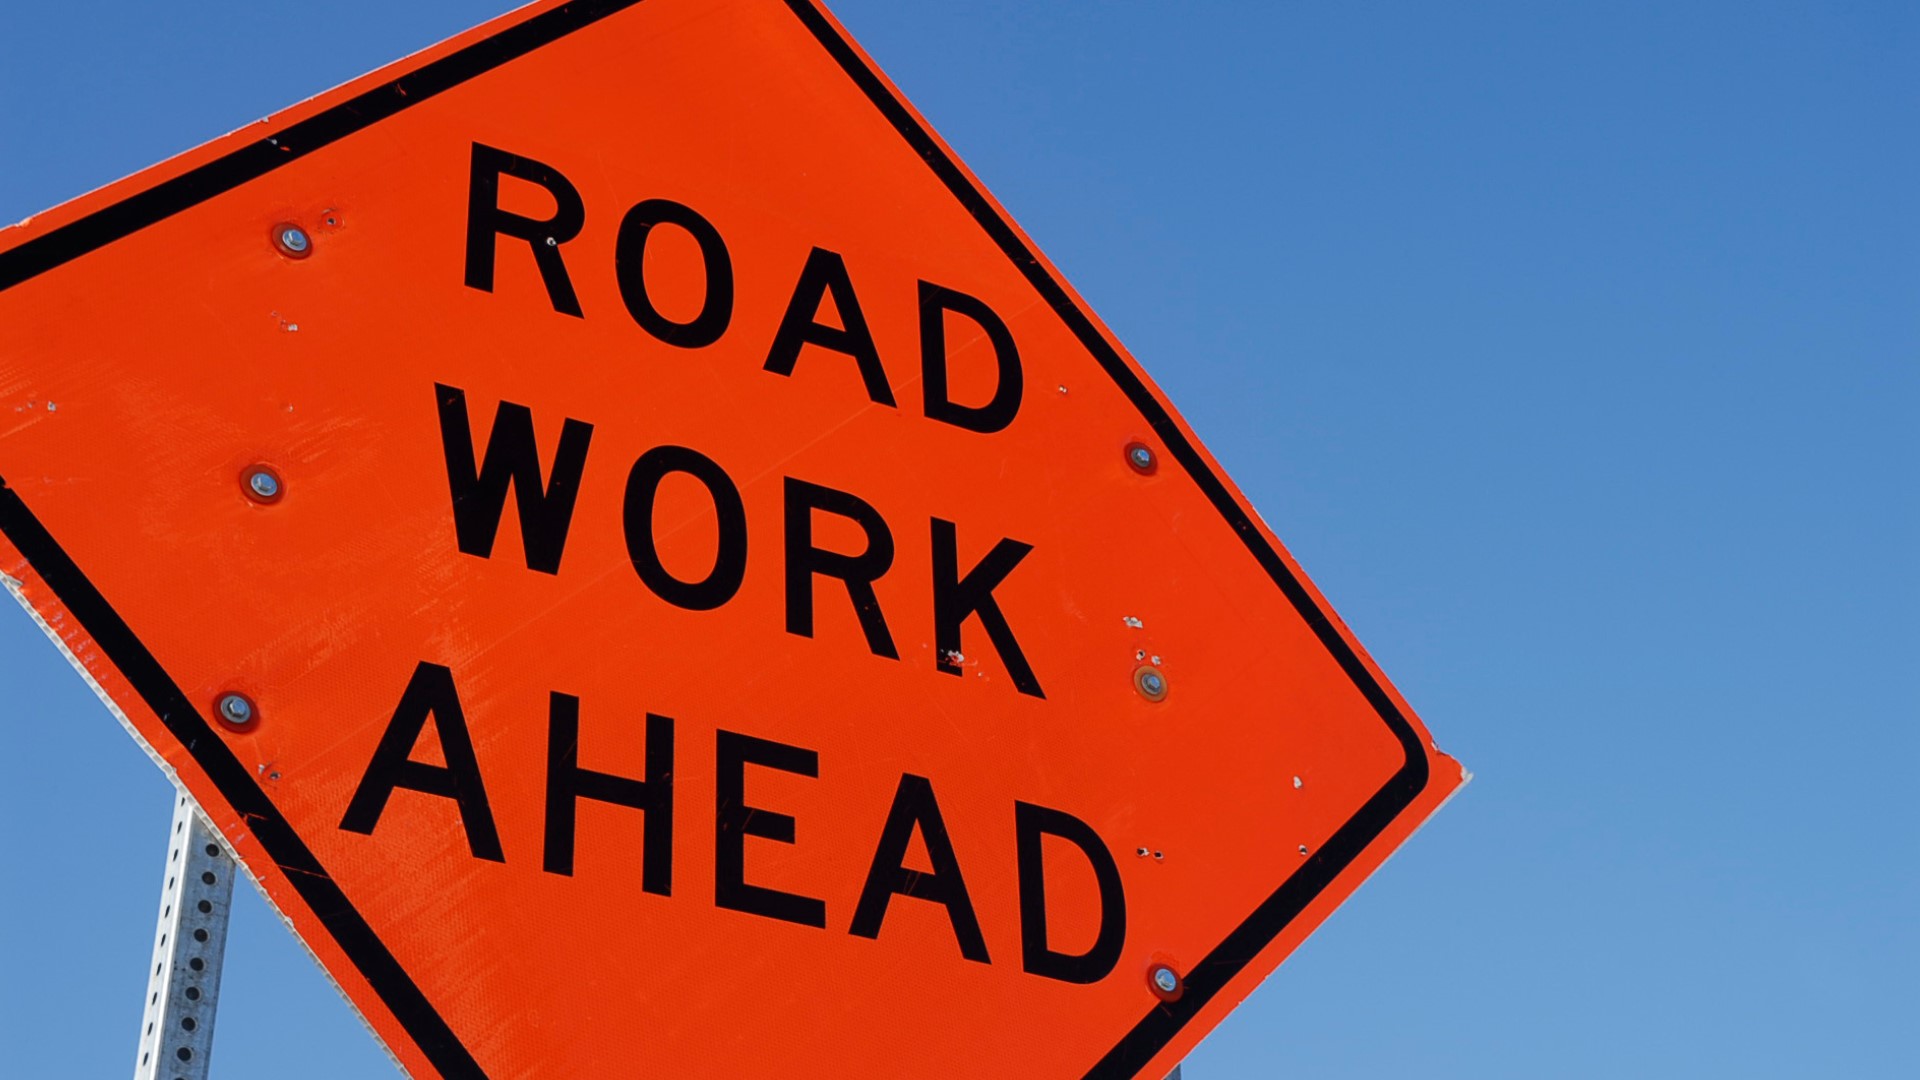 Kentwood city officials have released the road construction and maintenance schedule for the rest of the summer, so plan your commutes accordingly. The City Commission approved the resurfacing and maintenance program, which includes improvements to 30 miles of major and local roads at a cost of $1.4 million.